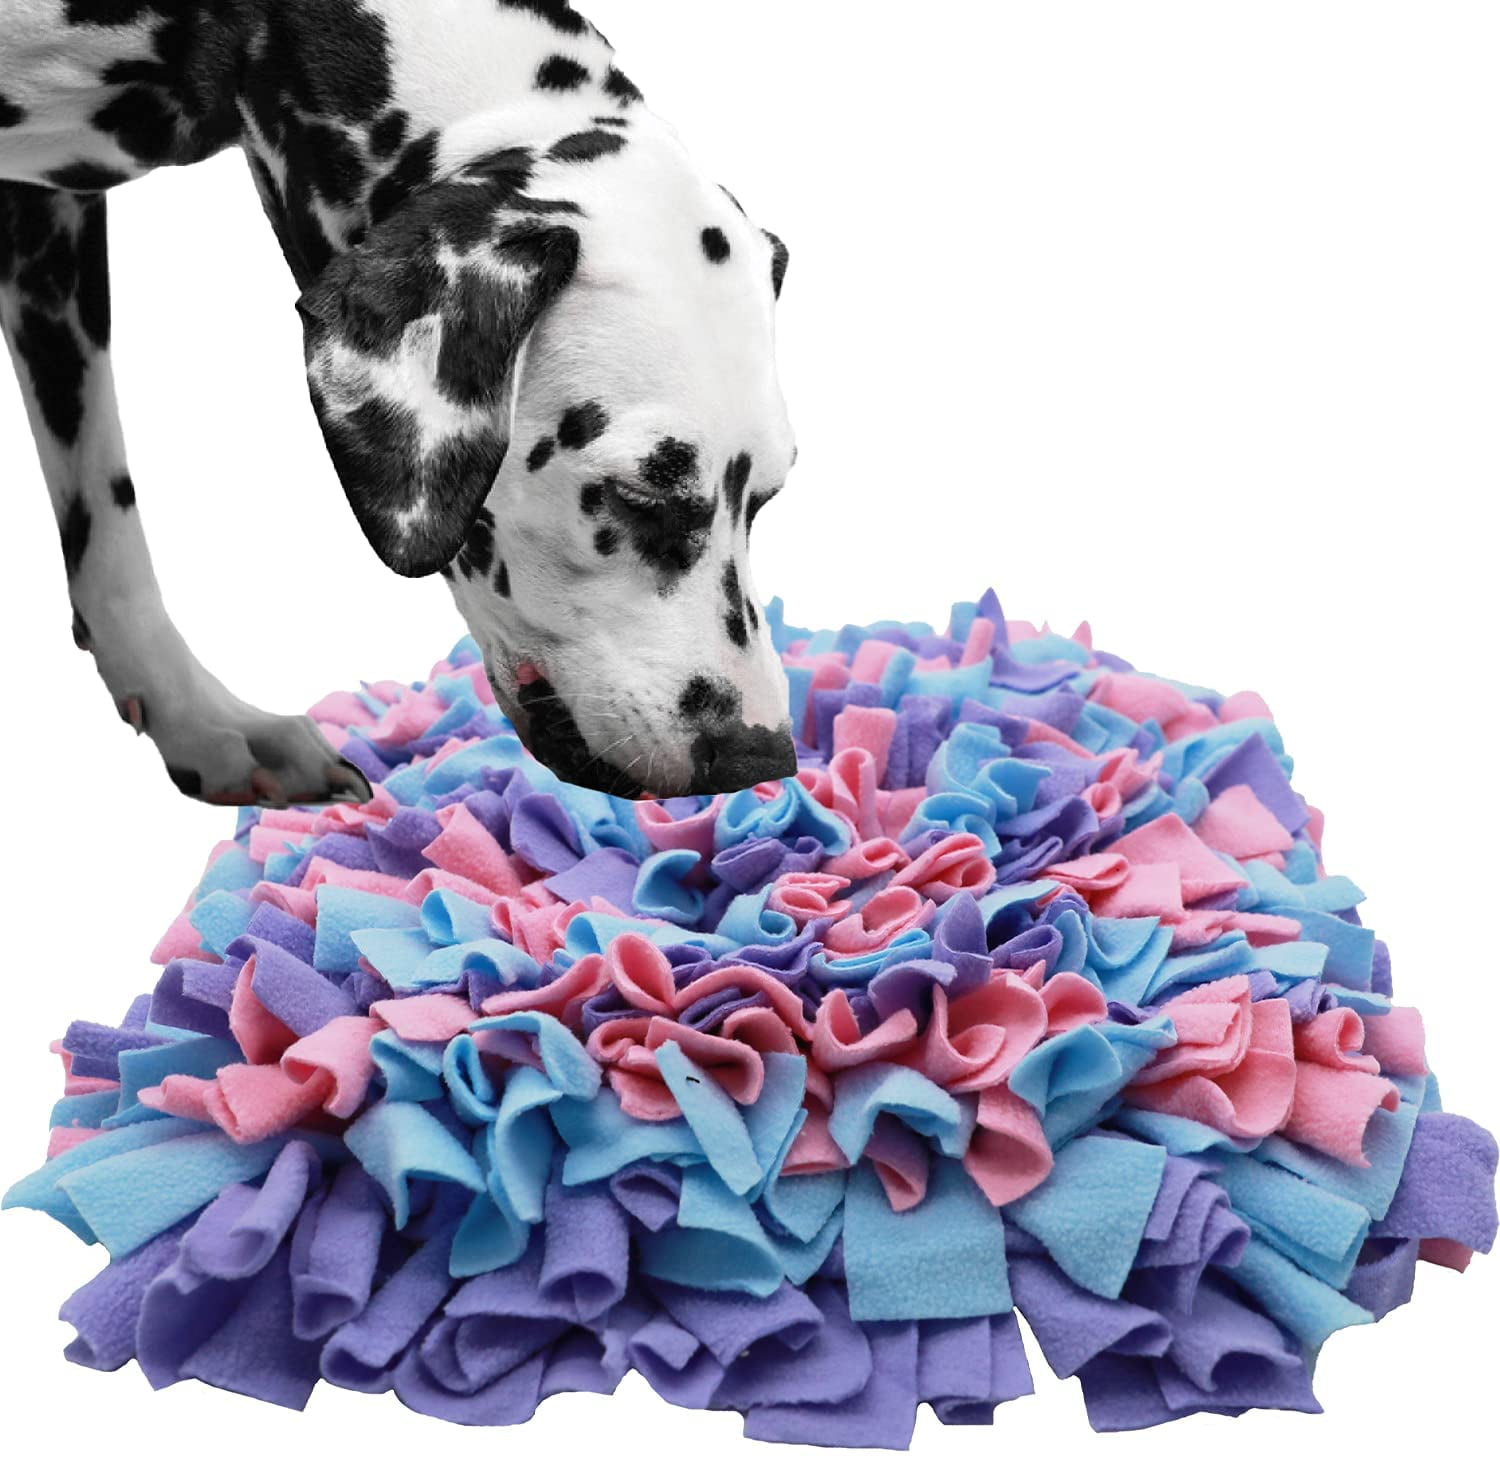 Bakumon Snuffle Mat for Dogs 21x16Inch Interactive Sniff Mats for Large  Medium Small Breed Dog Pet,Snuffle Bowl Mat Nosework Training Foraging Pad